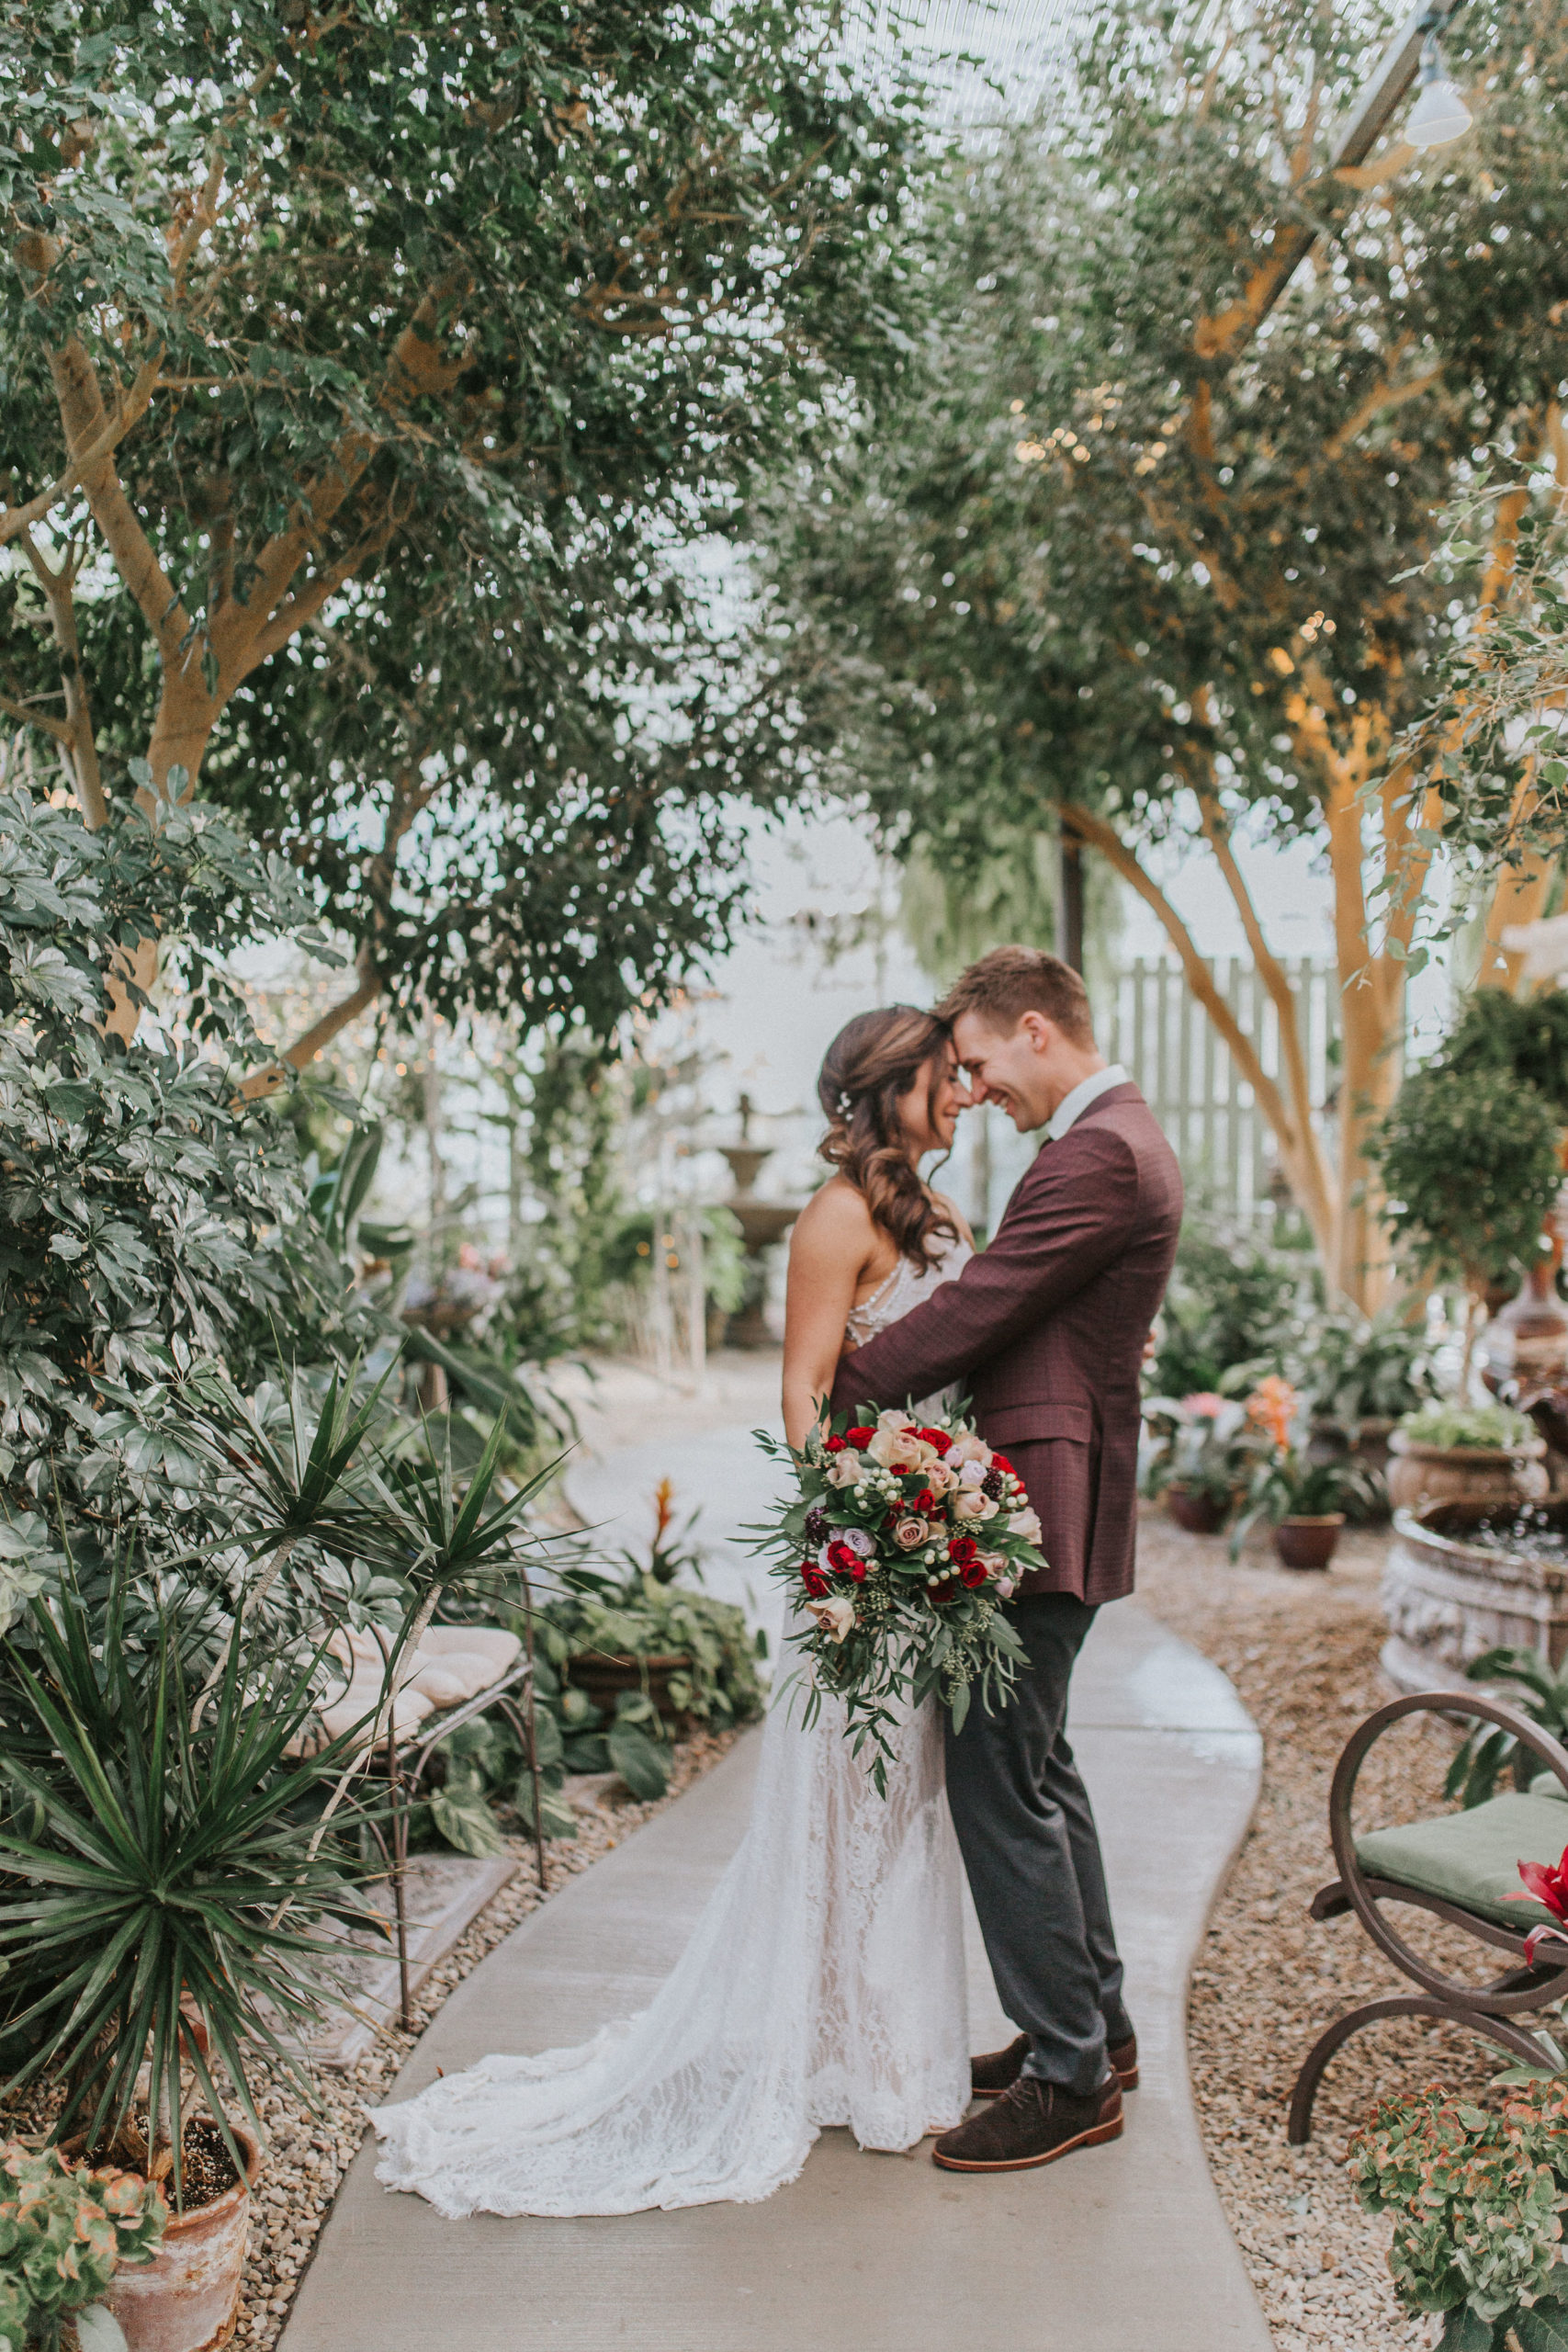 Sacramento wedding photographer captures southern wedding couple embracing each other surrounded by flowers and plants, holding a red rose bouquet